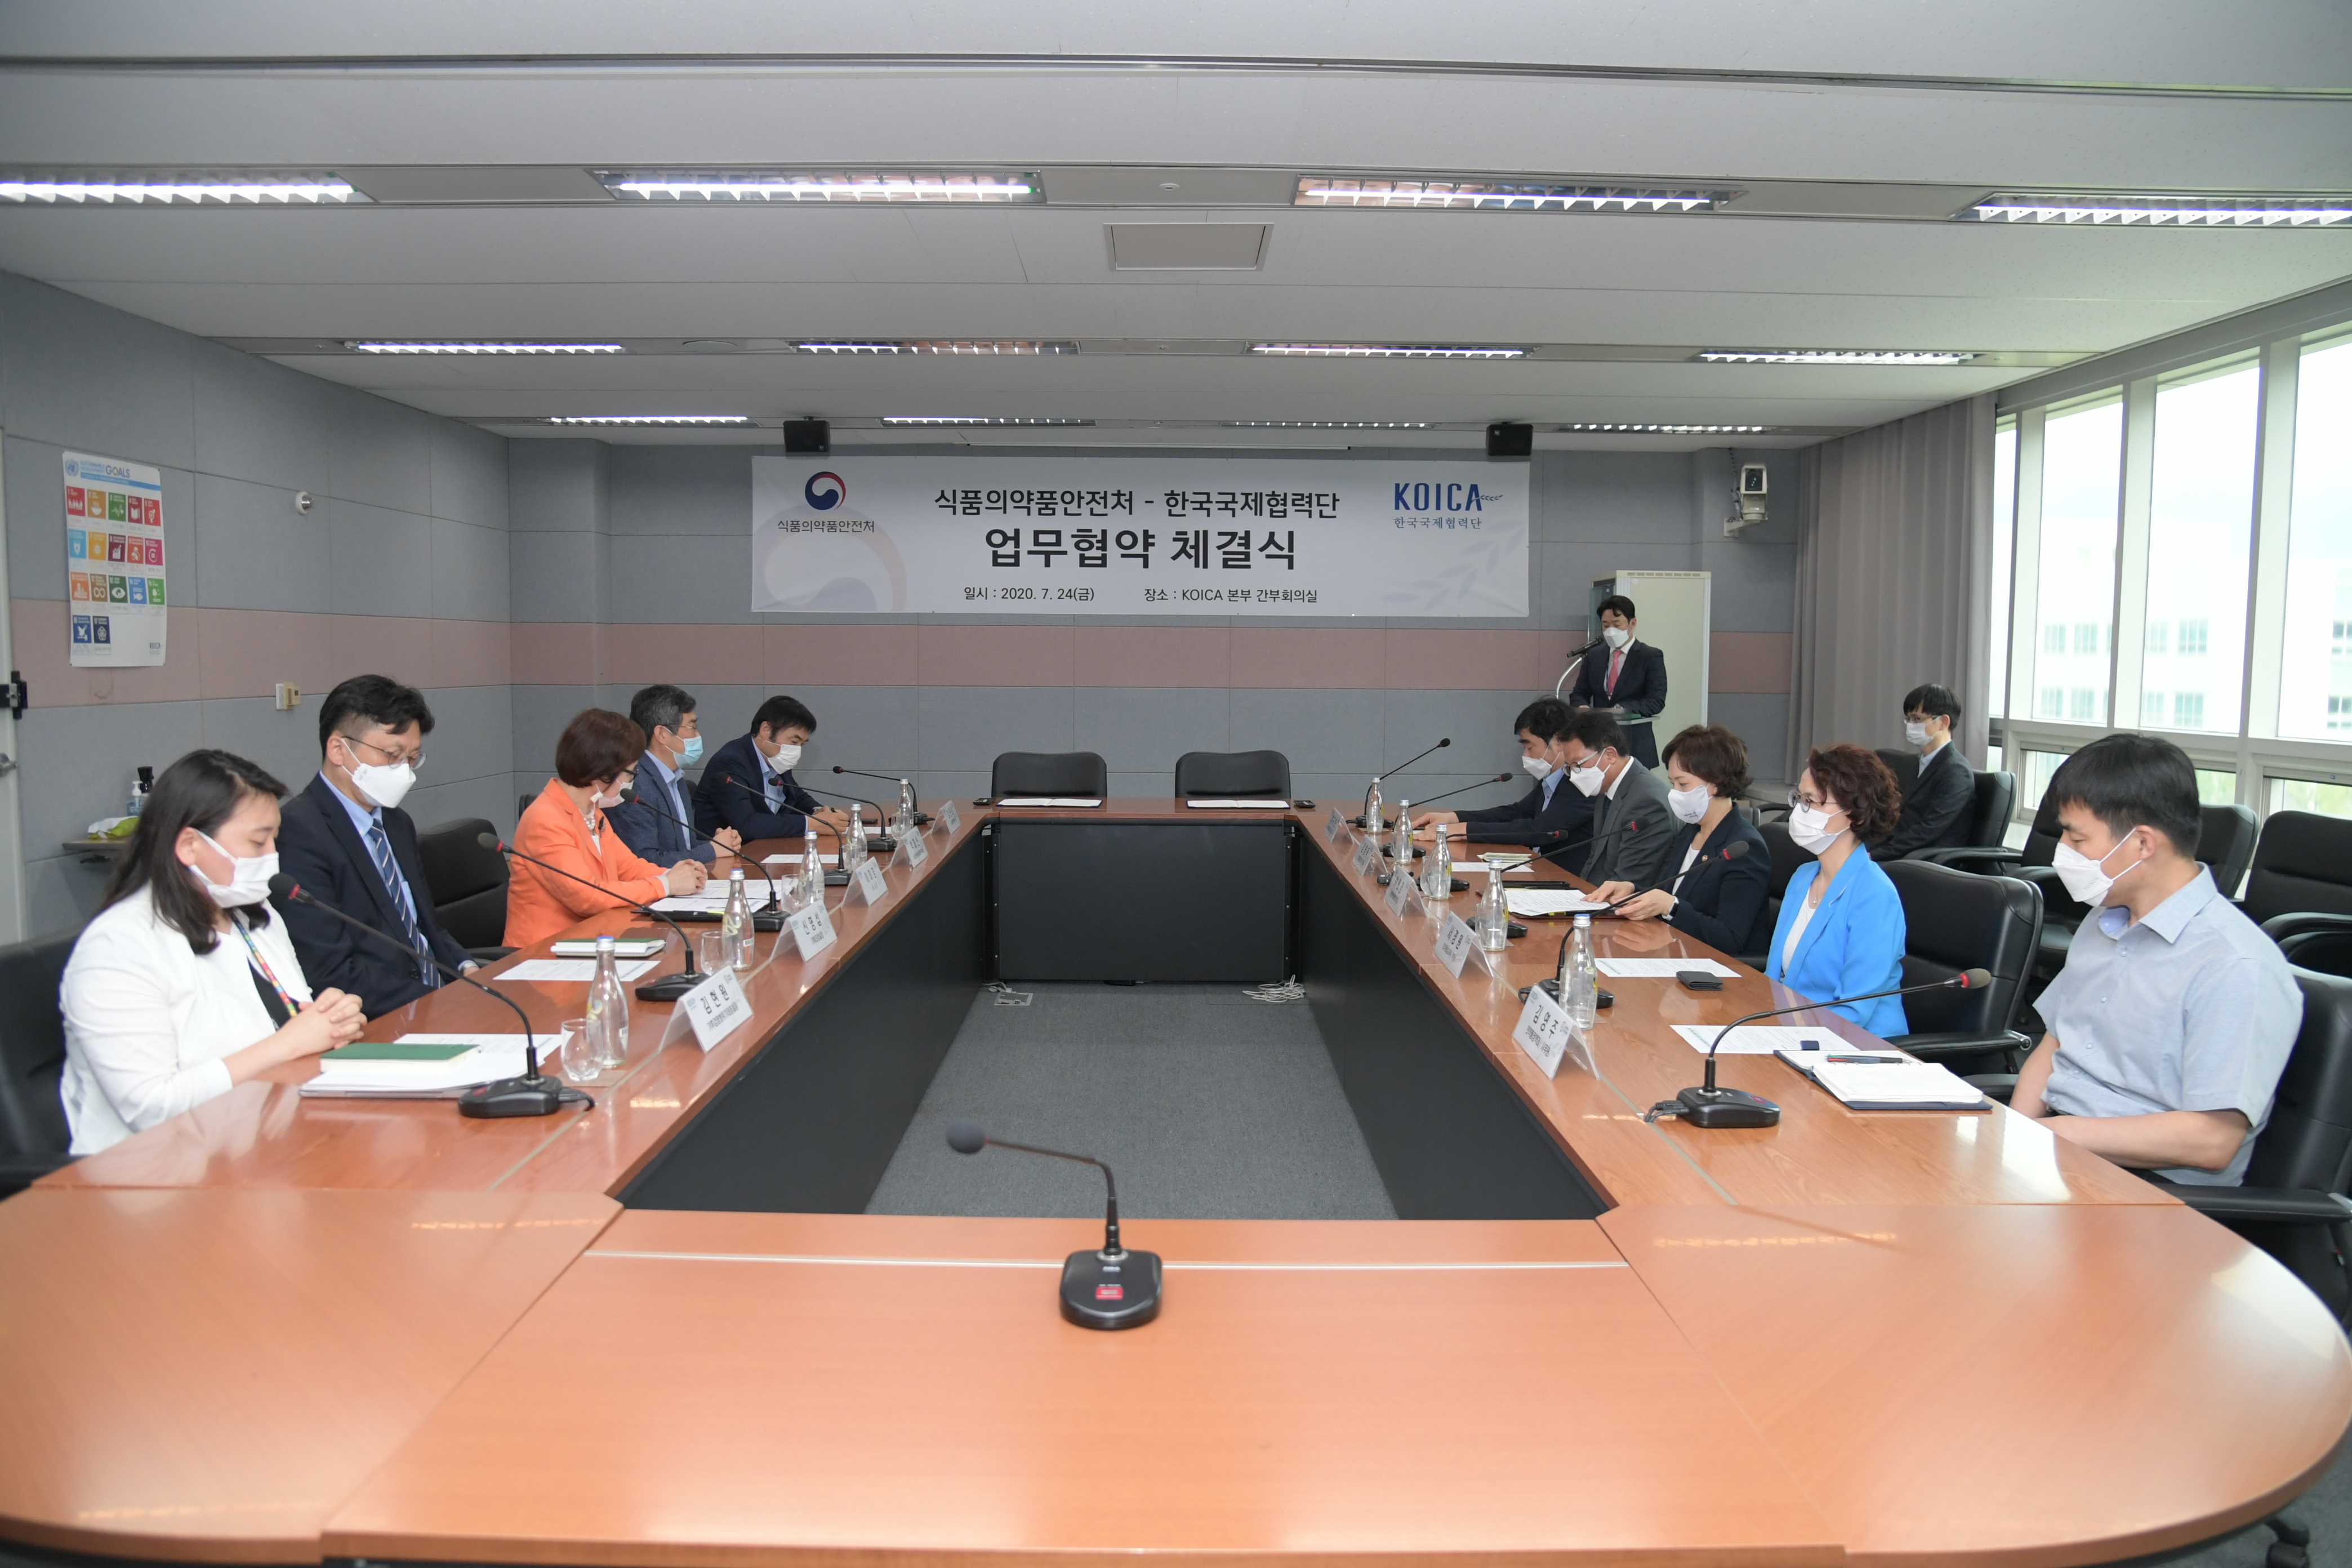 [Jul. 27, 2020] Ministry of Food and Drug Safety and Korea International Cooperation Agency sign an MOU